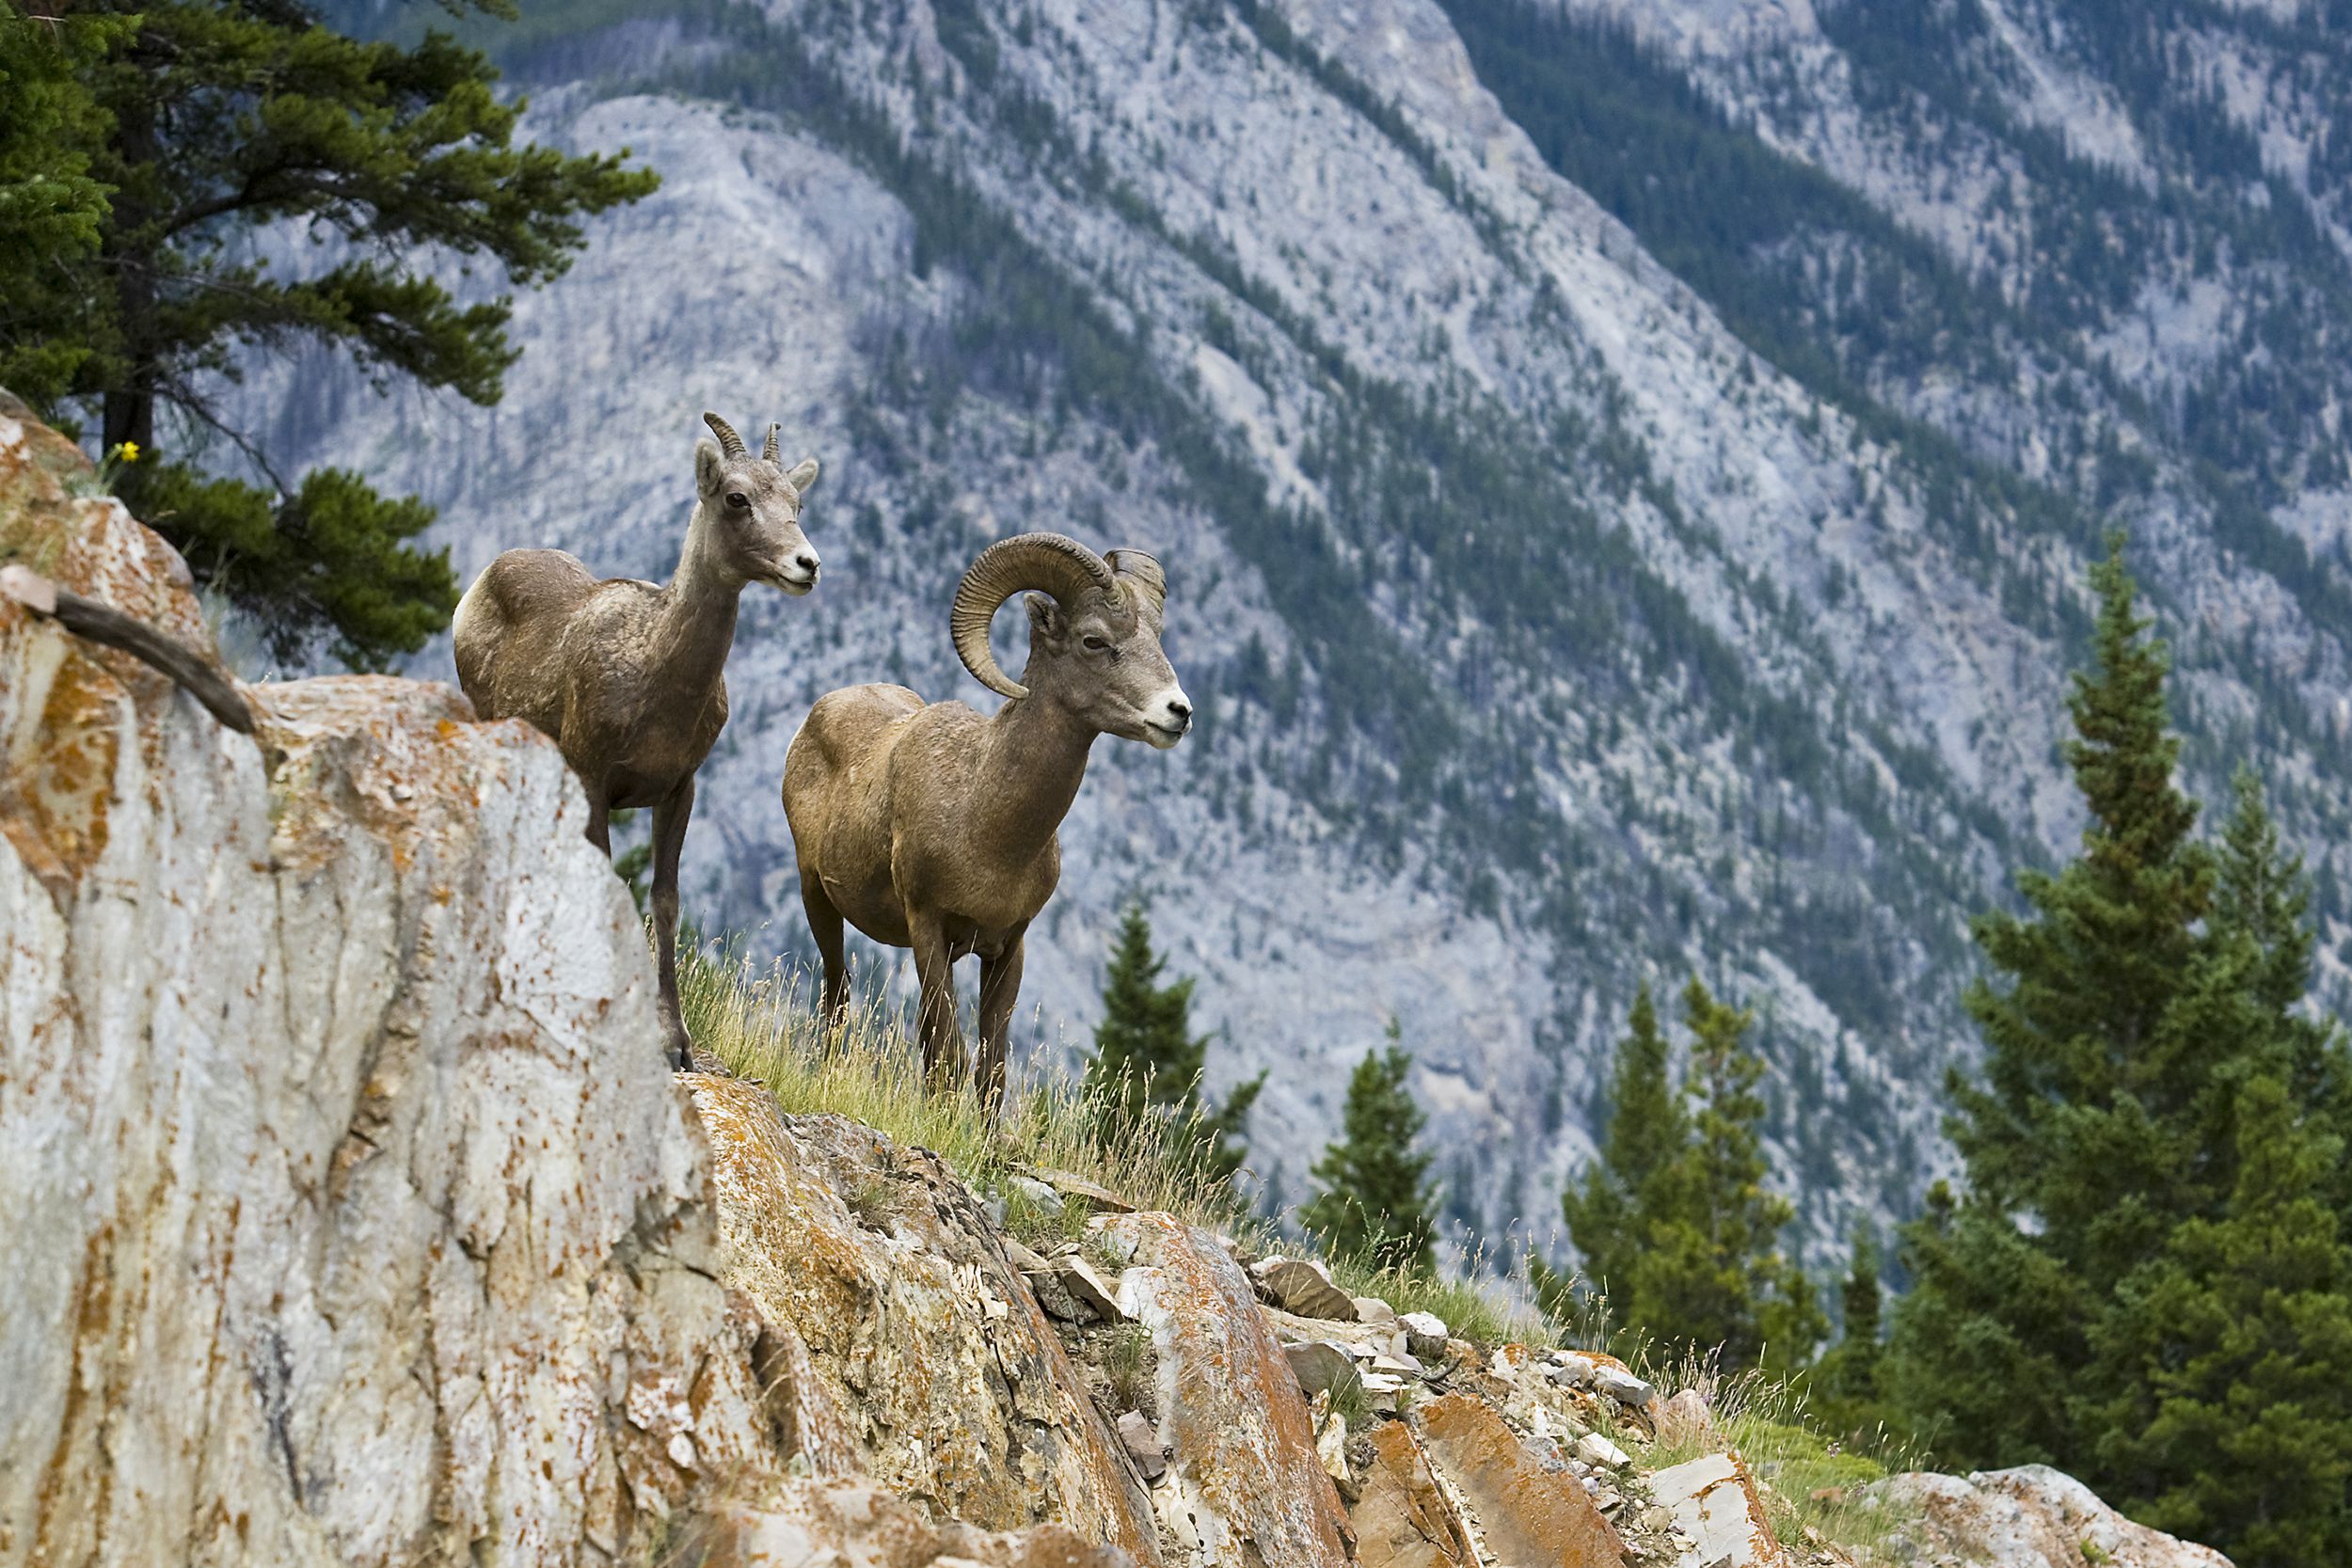 <p>Founded in 1885, Banff is Canada's oldest national park and a World Heritage Site. It's home to bighorn sheep, elk, deer, grizzly and black bears, coyotes, fox, wolves, and more. Like other wild animal-teeming national parks, Banff has <a href="https://www.pc.gc.ca/en/pn-np/ab/banff/activ/observation-wildlifewatching">strict rules</a> about wildlife watching, so make sure you know those before you go, both for your own safety and for the wellbeing of the animals. Banff also offers plenty of opportunity to take a break from animal-spotting with hiking, fishing, cycling, and paddling, <a href="https://www.pc.gc.ca/en/lhn-nhs/ab/caveandbasin">historic caves</a>, <a href="https://www.pc.gc.ca/en/lhn-nhs/ab/banff">museums</a>, and <a href="https://www.hotsprings.ca/banff">hot springs</a>.</p>